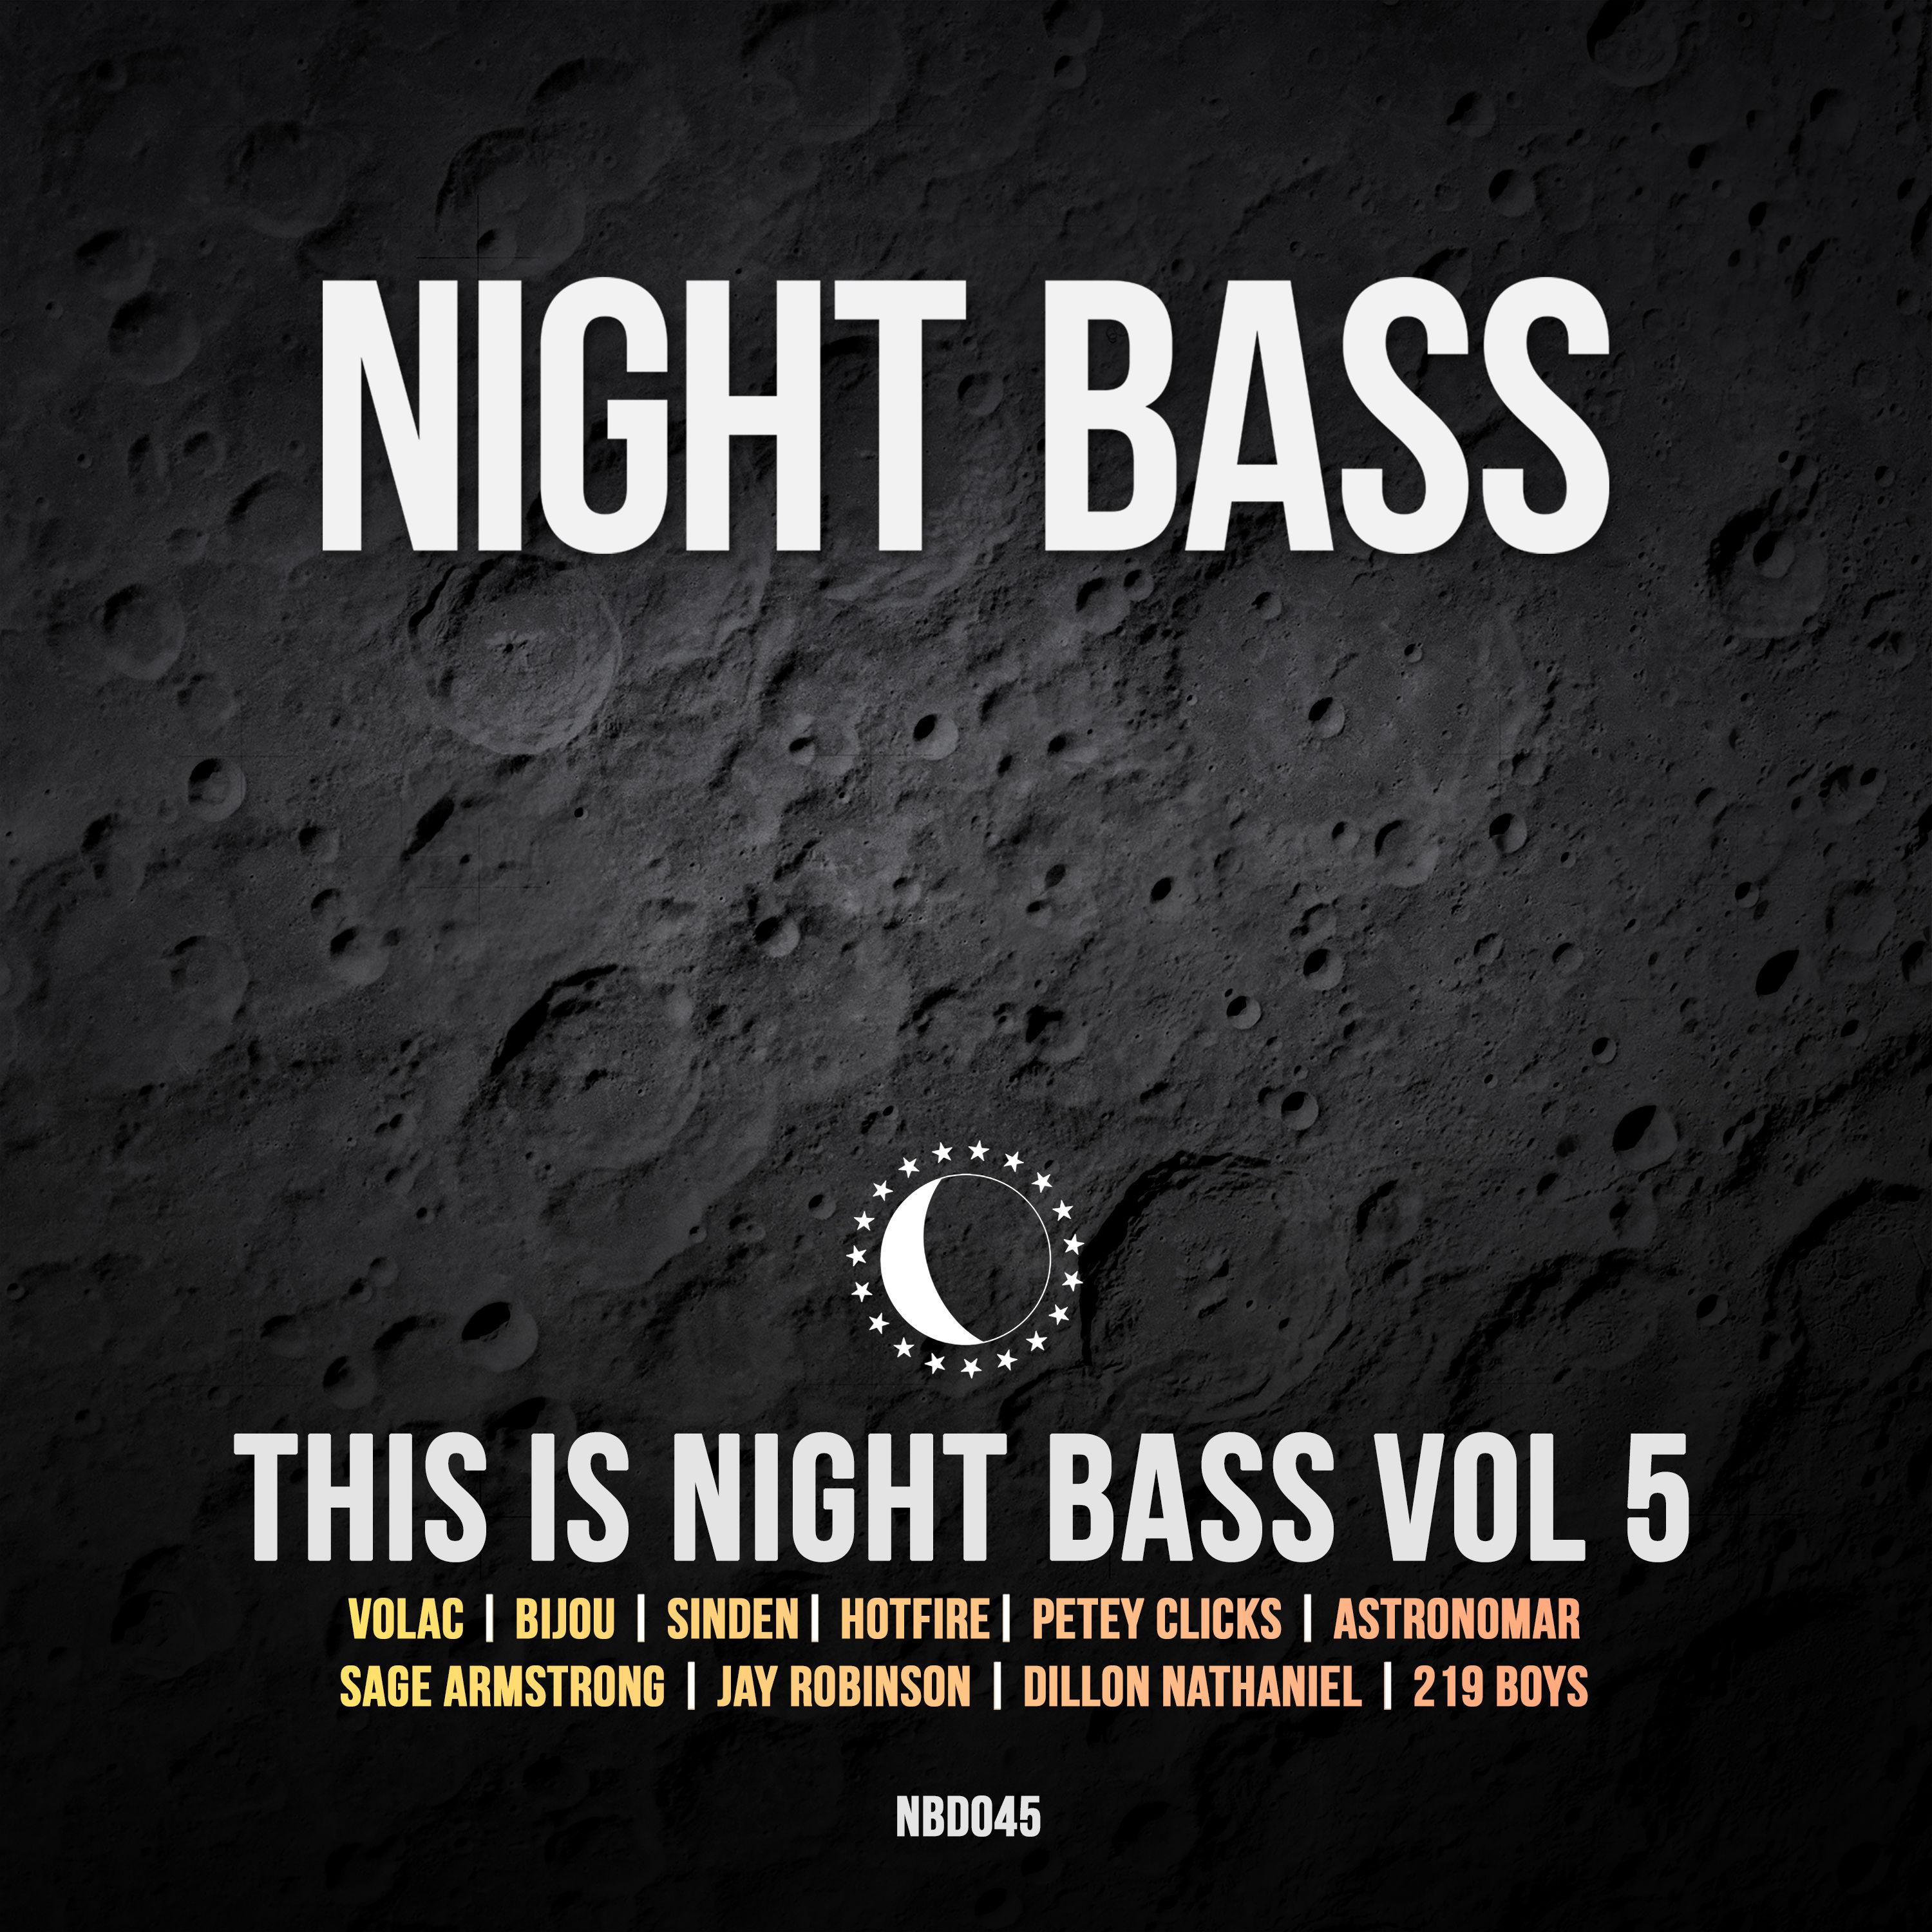 This is Night Bass, Vol. 5